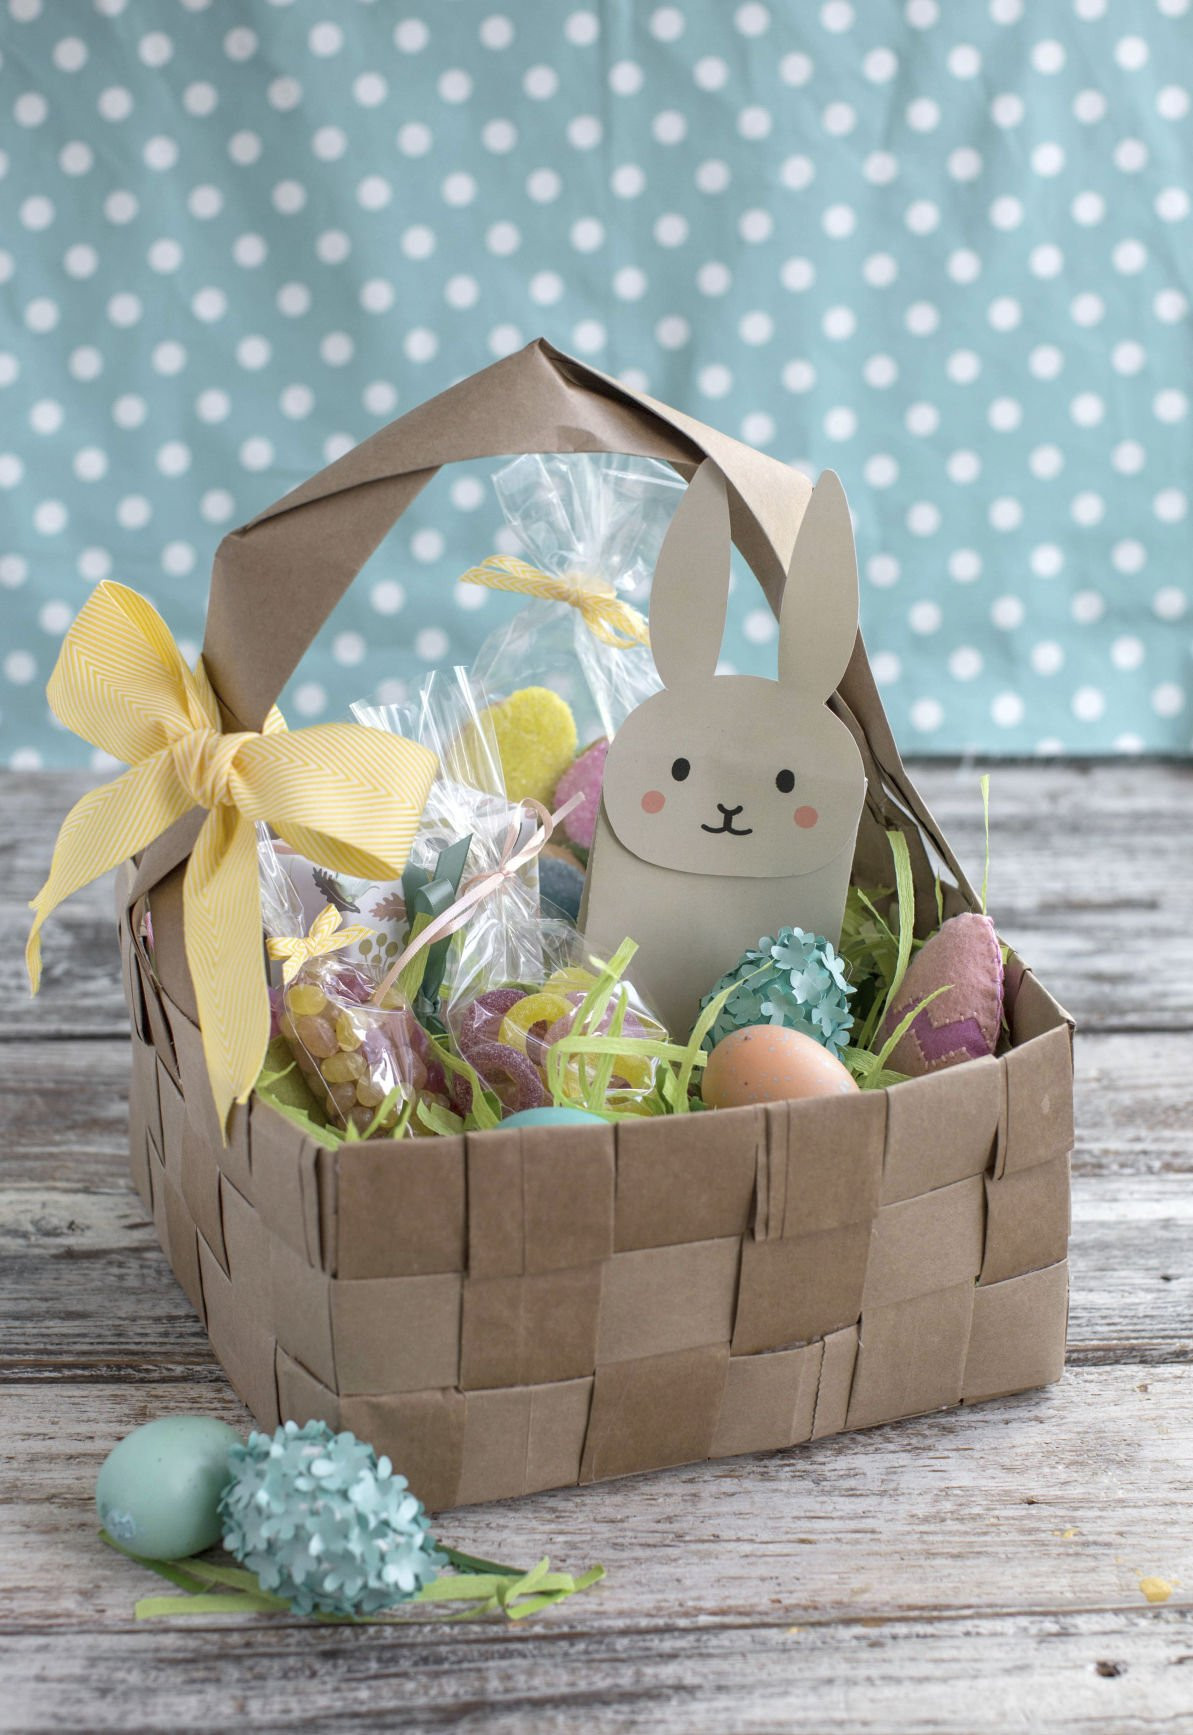 Creative Easter Service Ideas
 Hop to it 5 ways to creative with Easter baskets